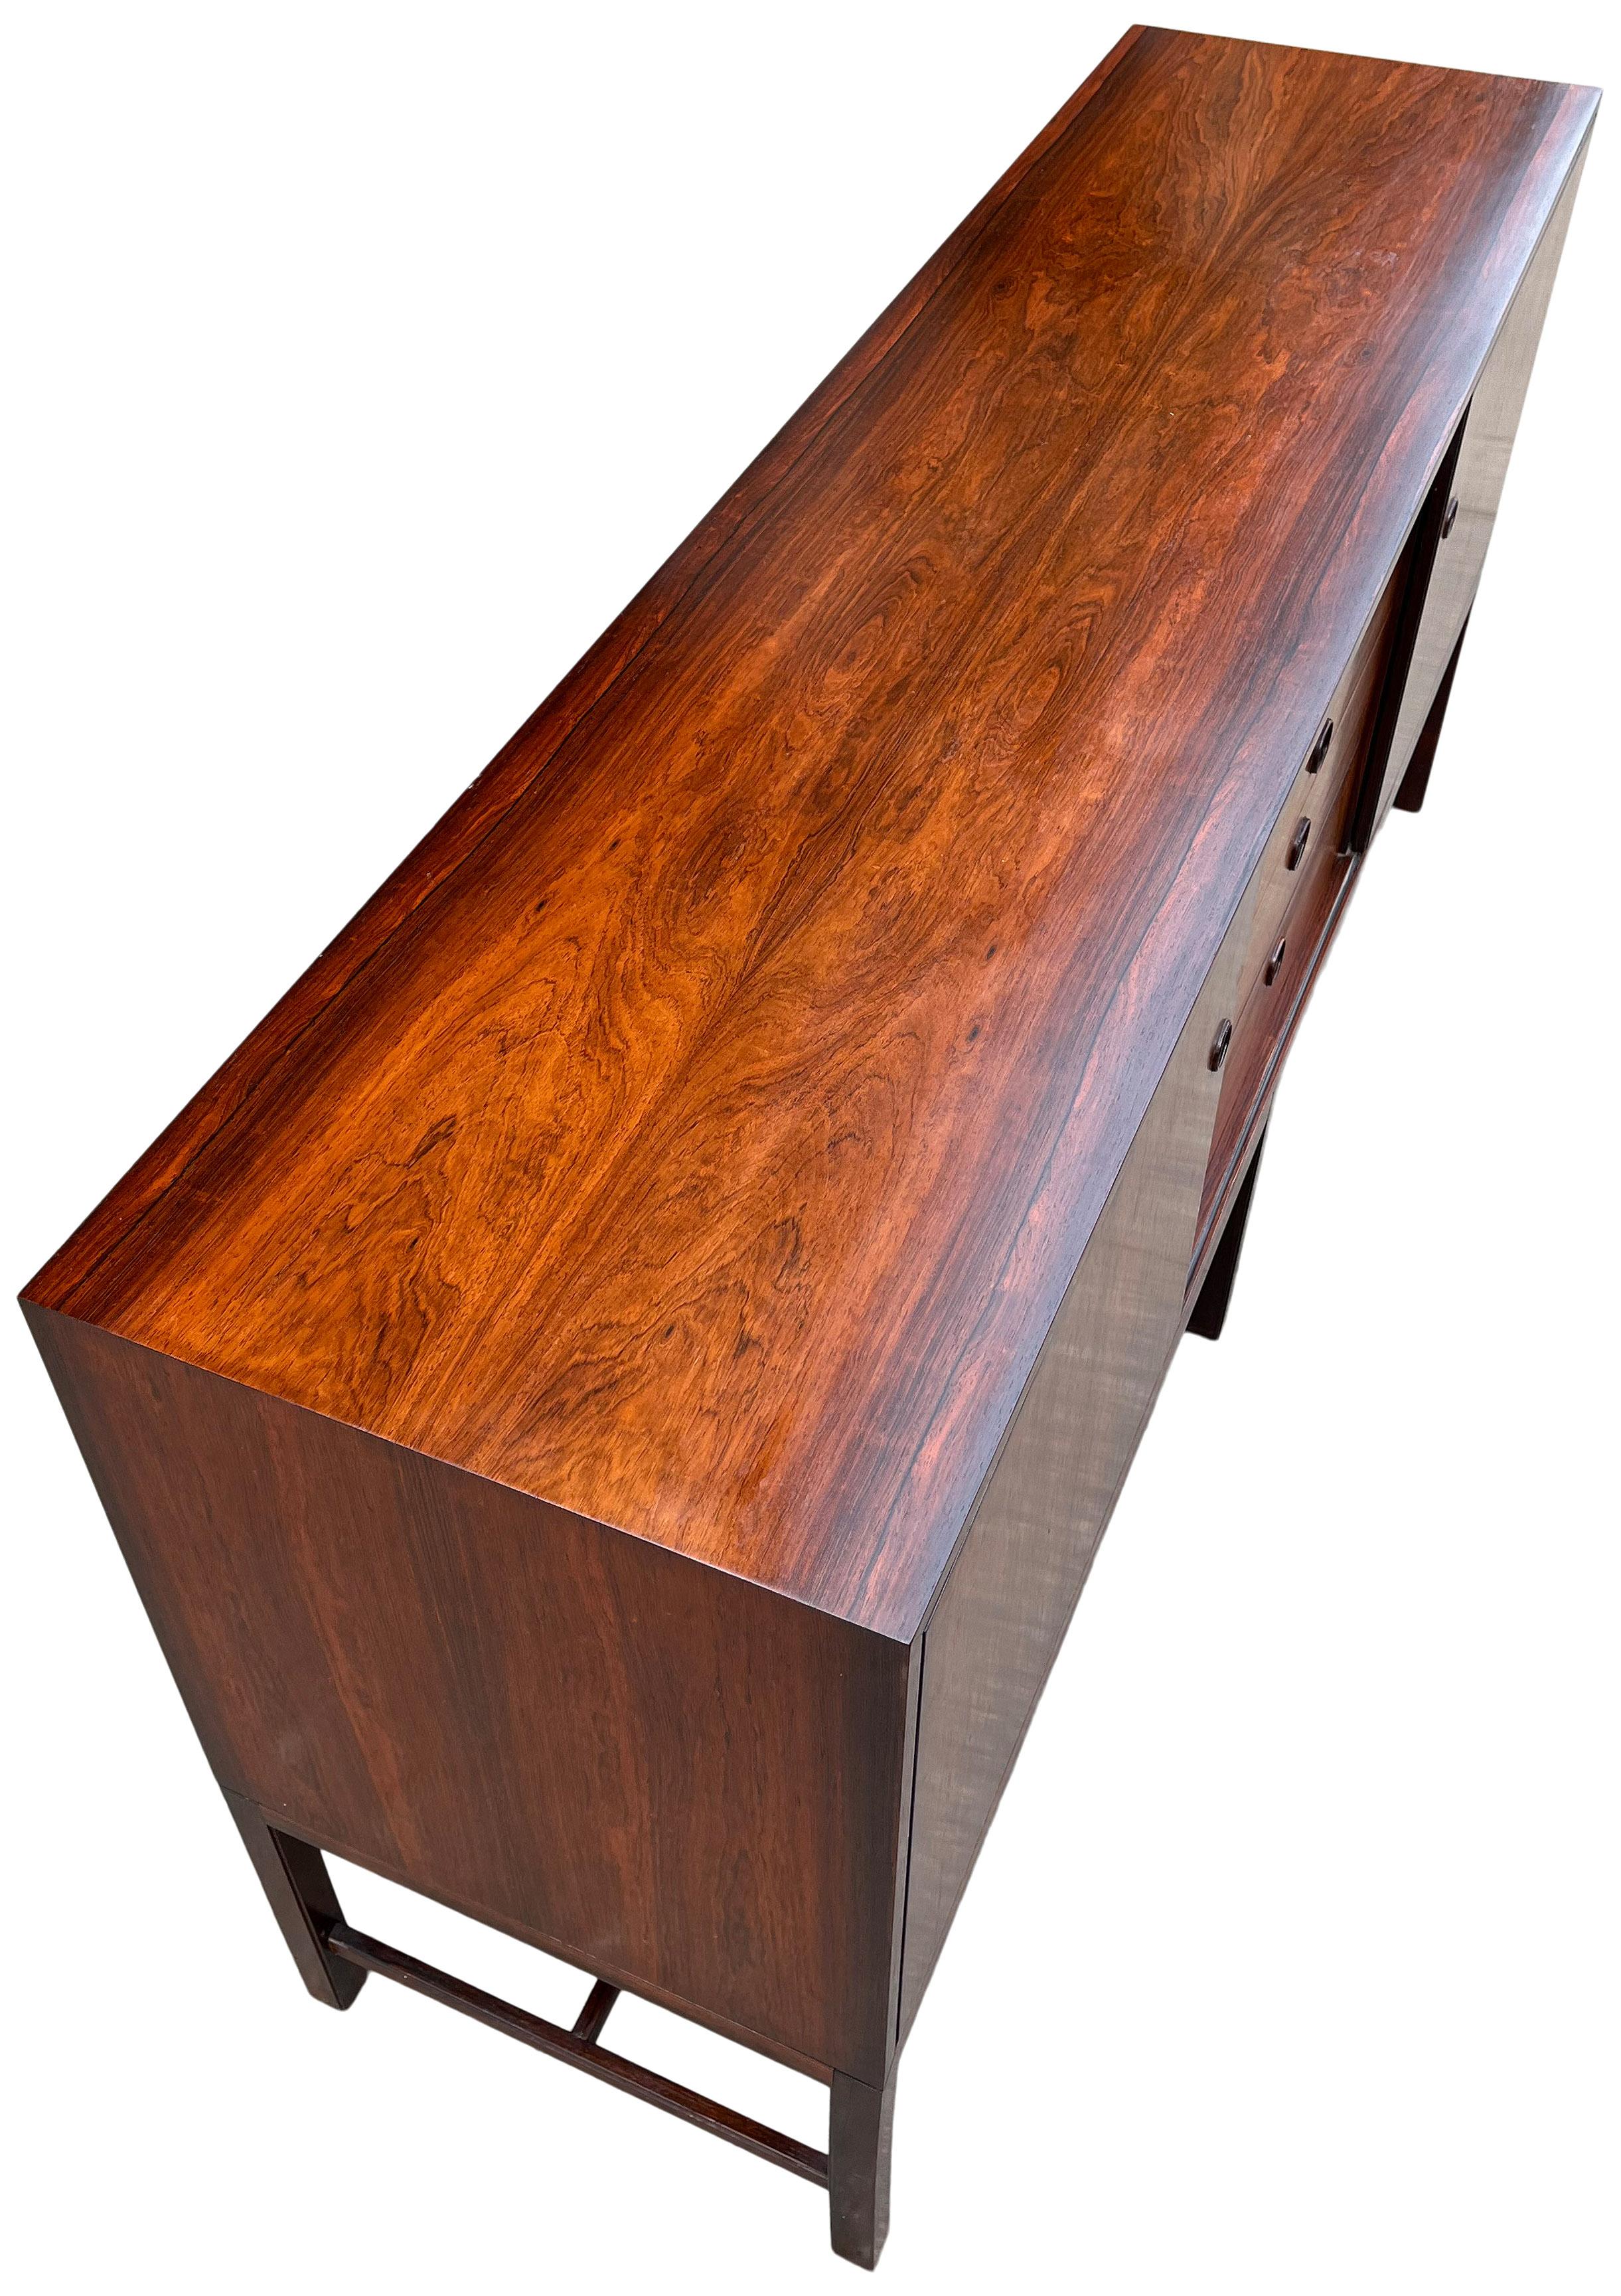 Gorgeous sideboard in Brazilian rosewood with impeccable construction and crantsmanship. Solid wood floating base. Sliding doors reveal two section with adjustable shelves. Center having pull out drawers. Designed by Kai Lyngfeldt Larsen, a John